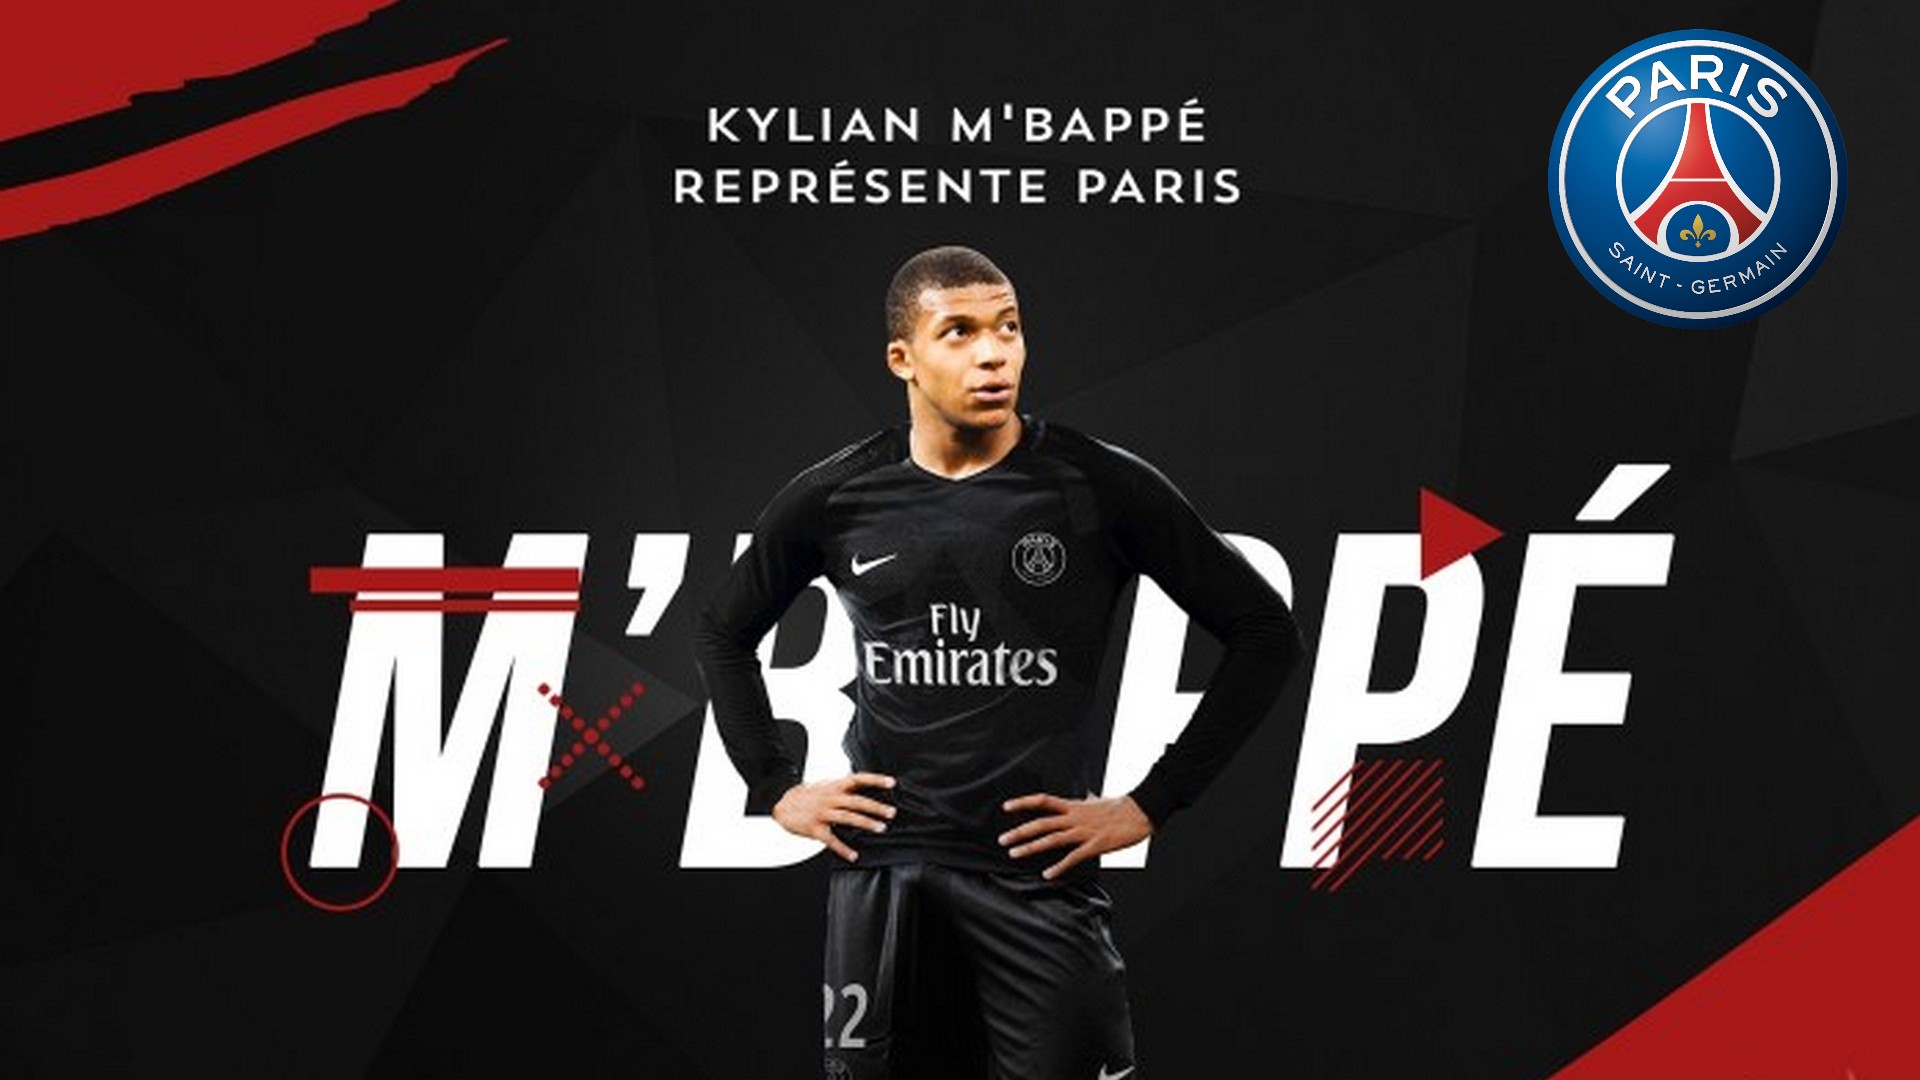 Wallpapers HD Kylian Mbappe PSG with resolution 1920x1080 pixel. You can make this wallpaper for your Mac or Windows Desktop Background, iPhone, Android or Tablet and another Smartphone device